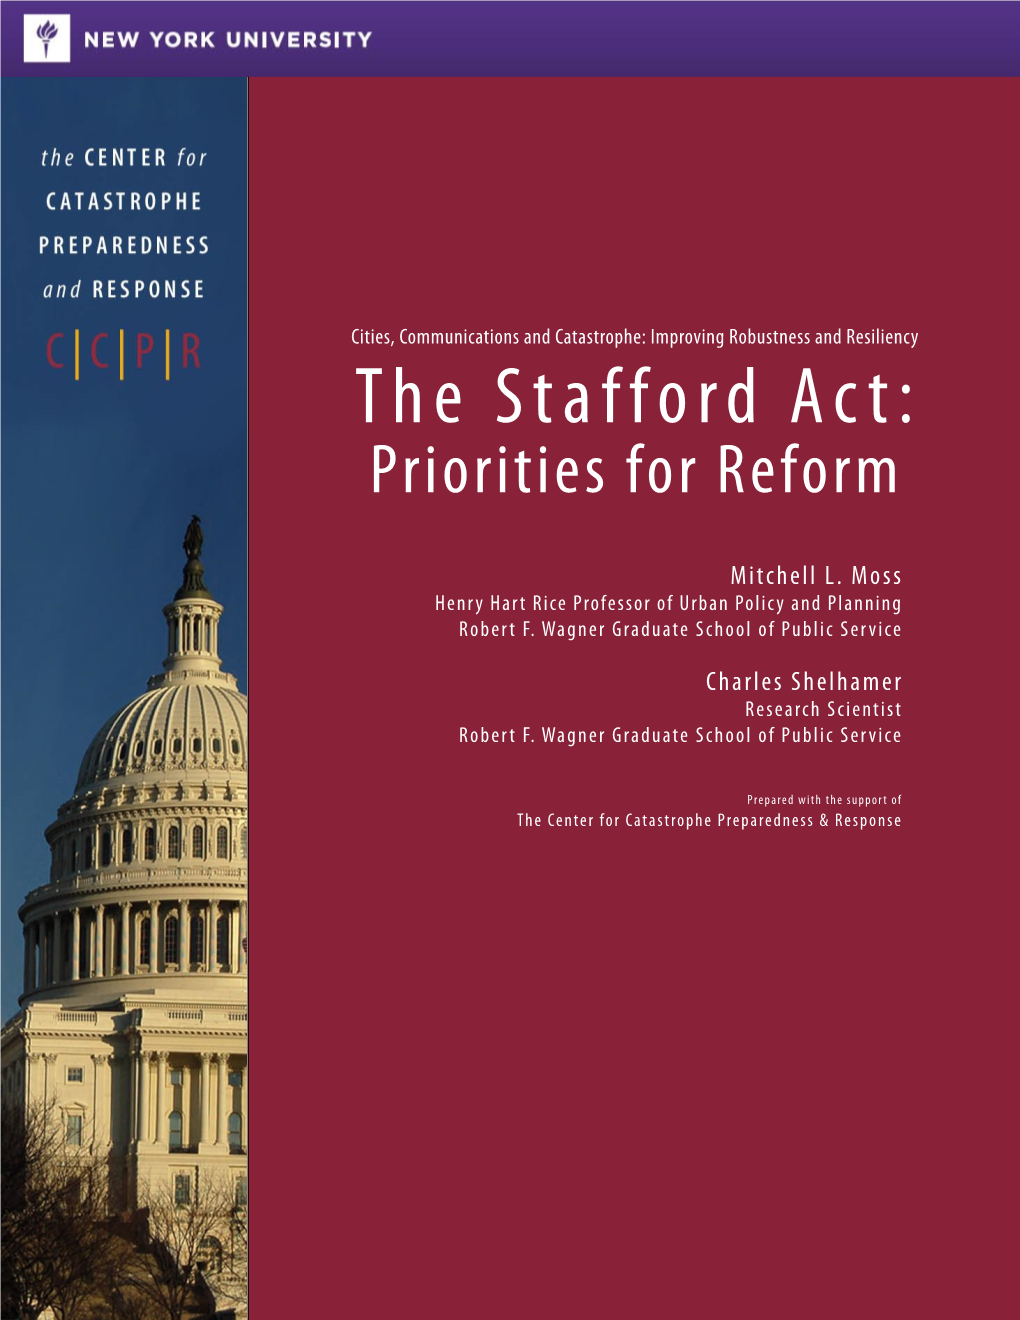 The Stafford Act: Priorities for Reform